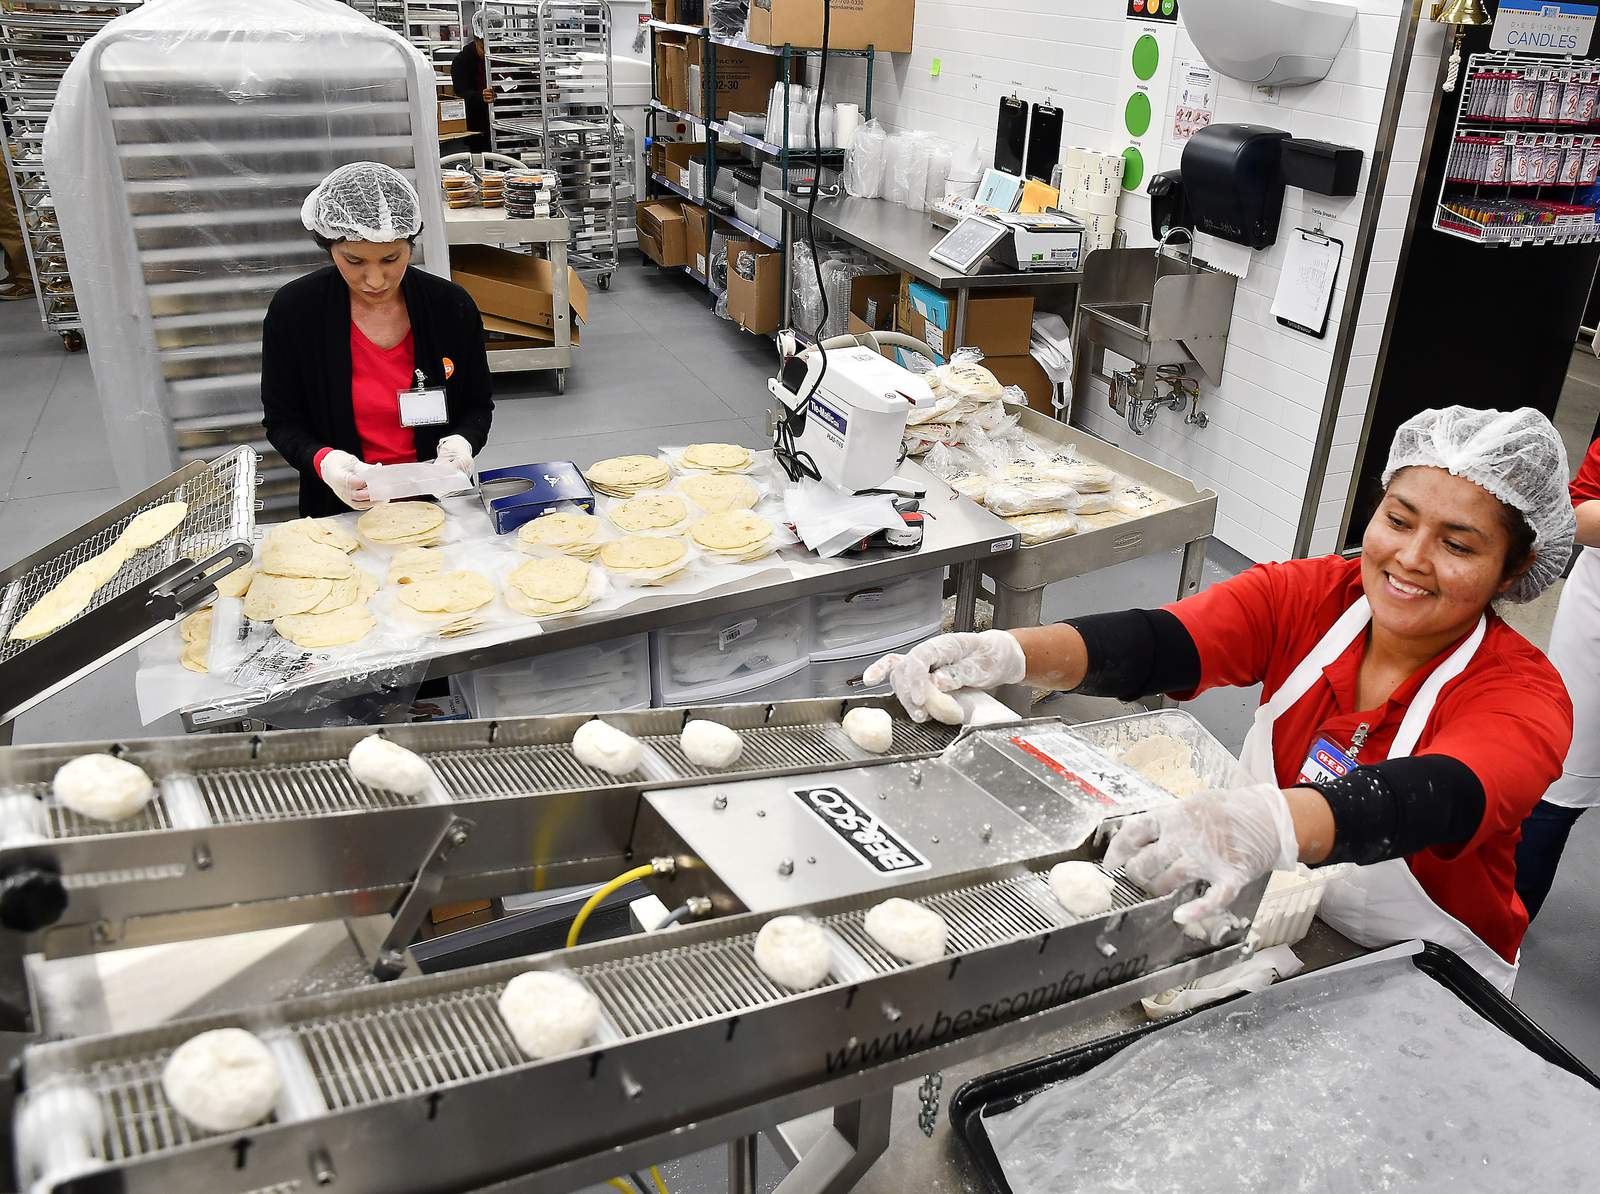 This H-E-B hack gets you free warm tortillas